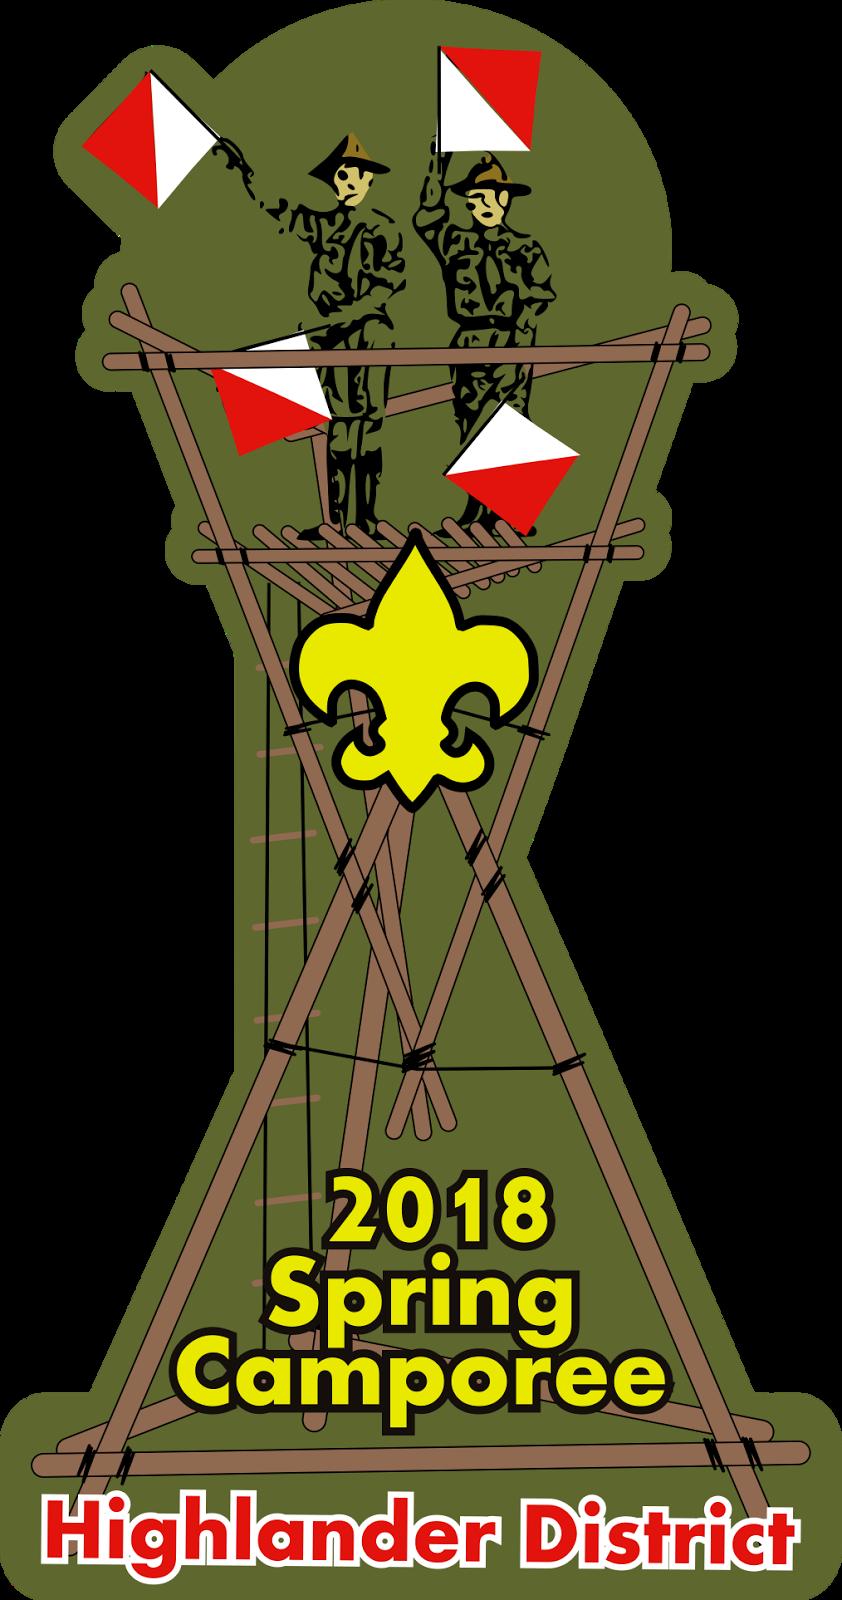 Highlander District Spring Camporee Dates: 13-15 April 2018 Location: Camp Reeves Theme: Back to Basics My ideal